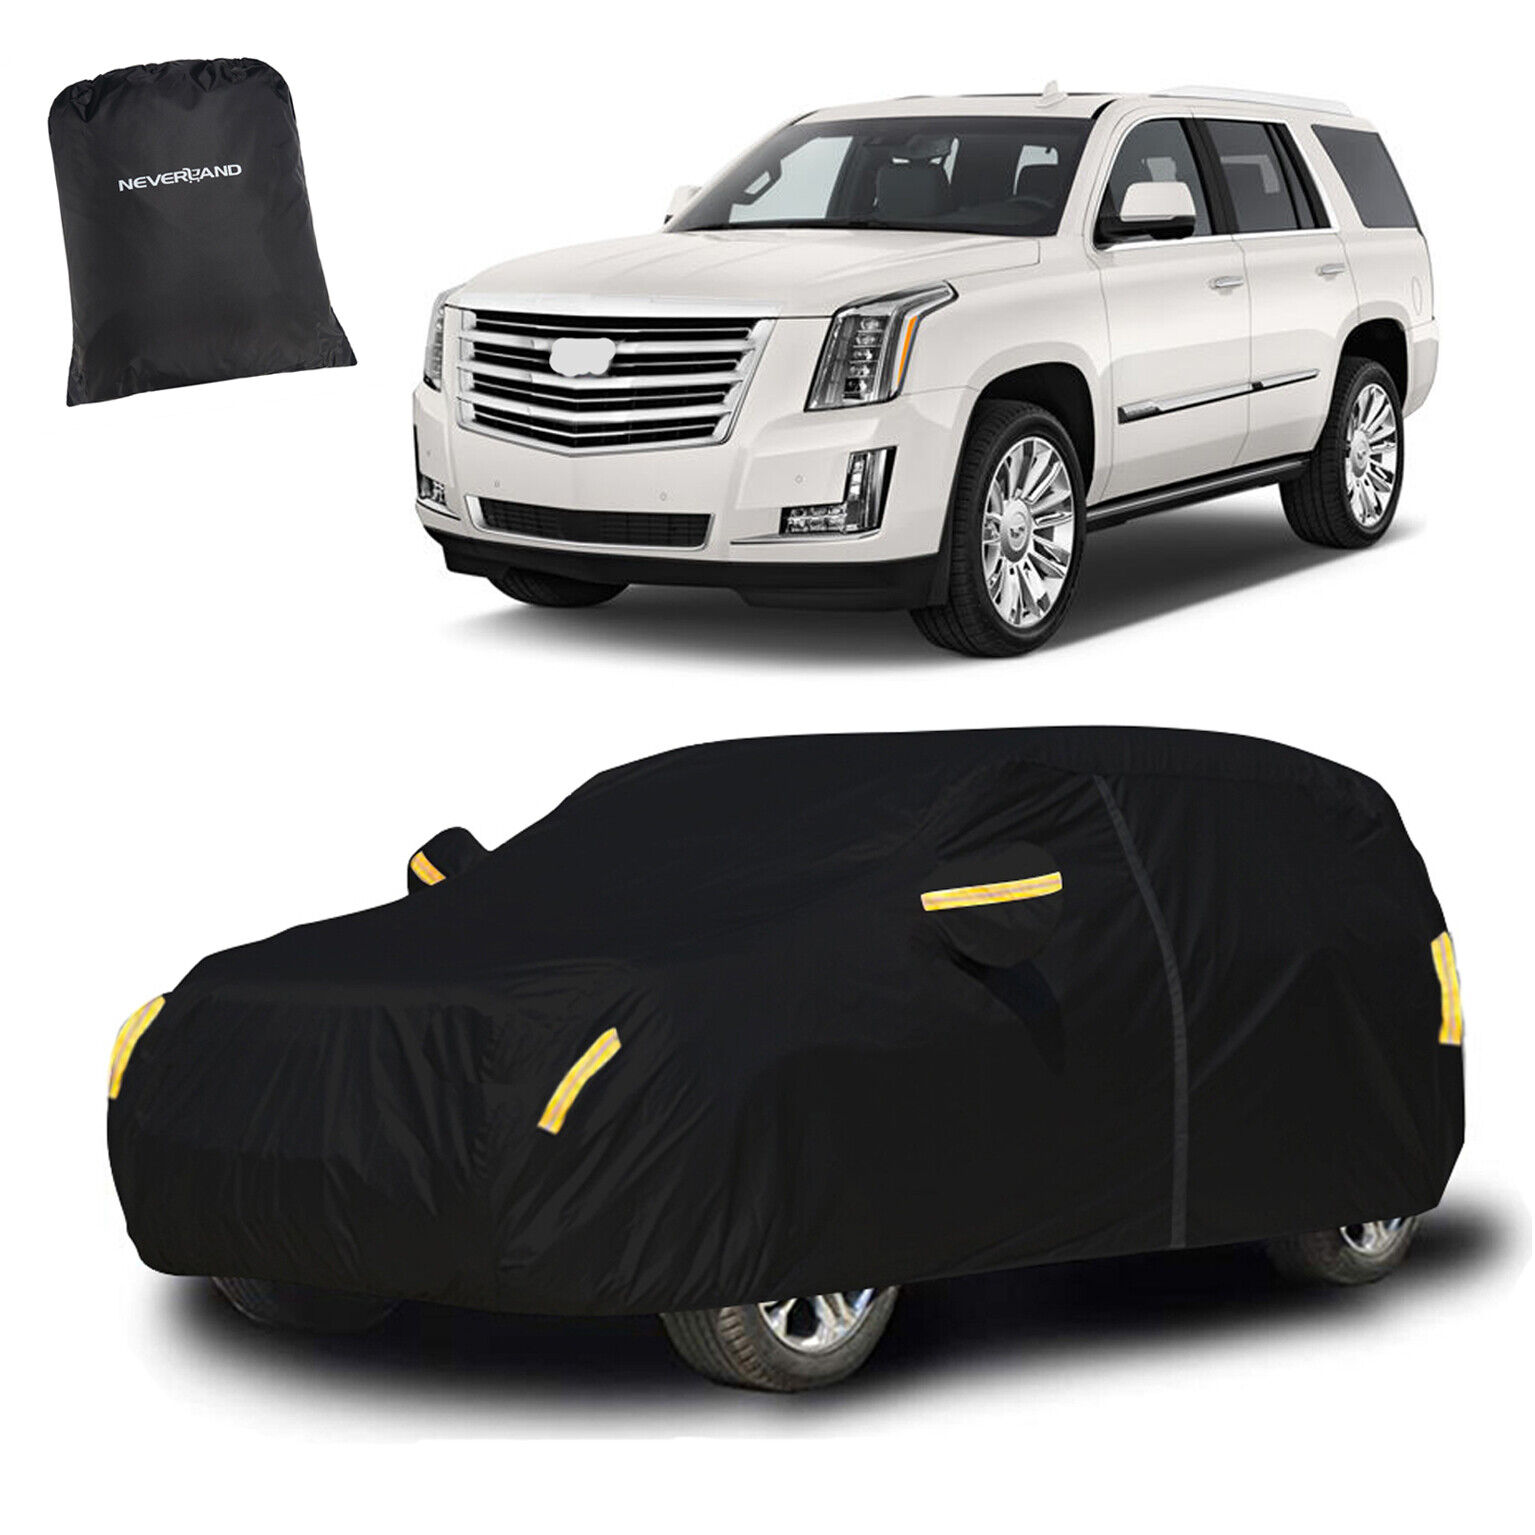 SUV Cover Outdoor Car Protection Waterproof Dust w/ Zipper For Cadillac Escalade